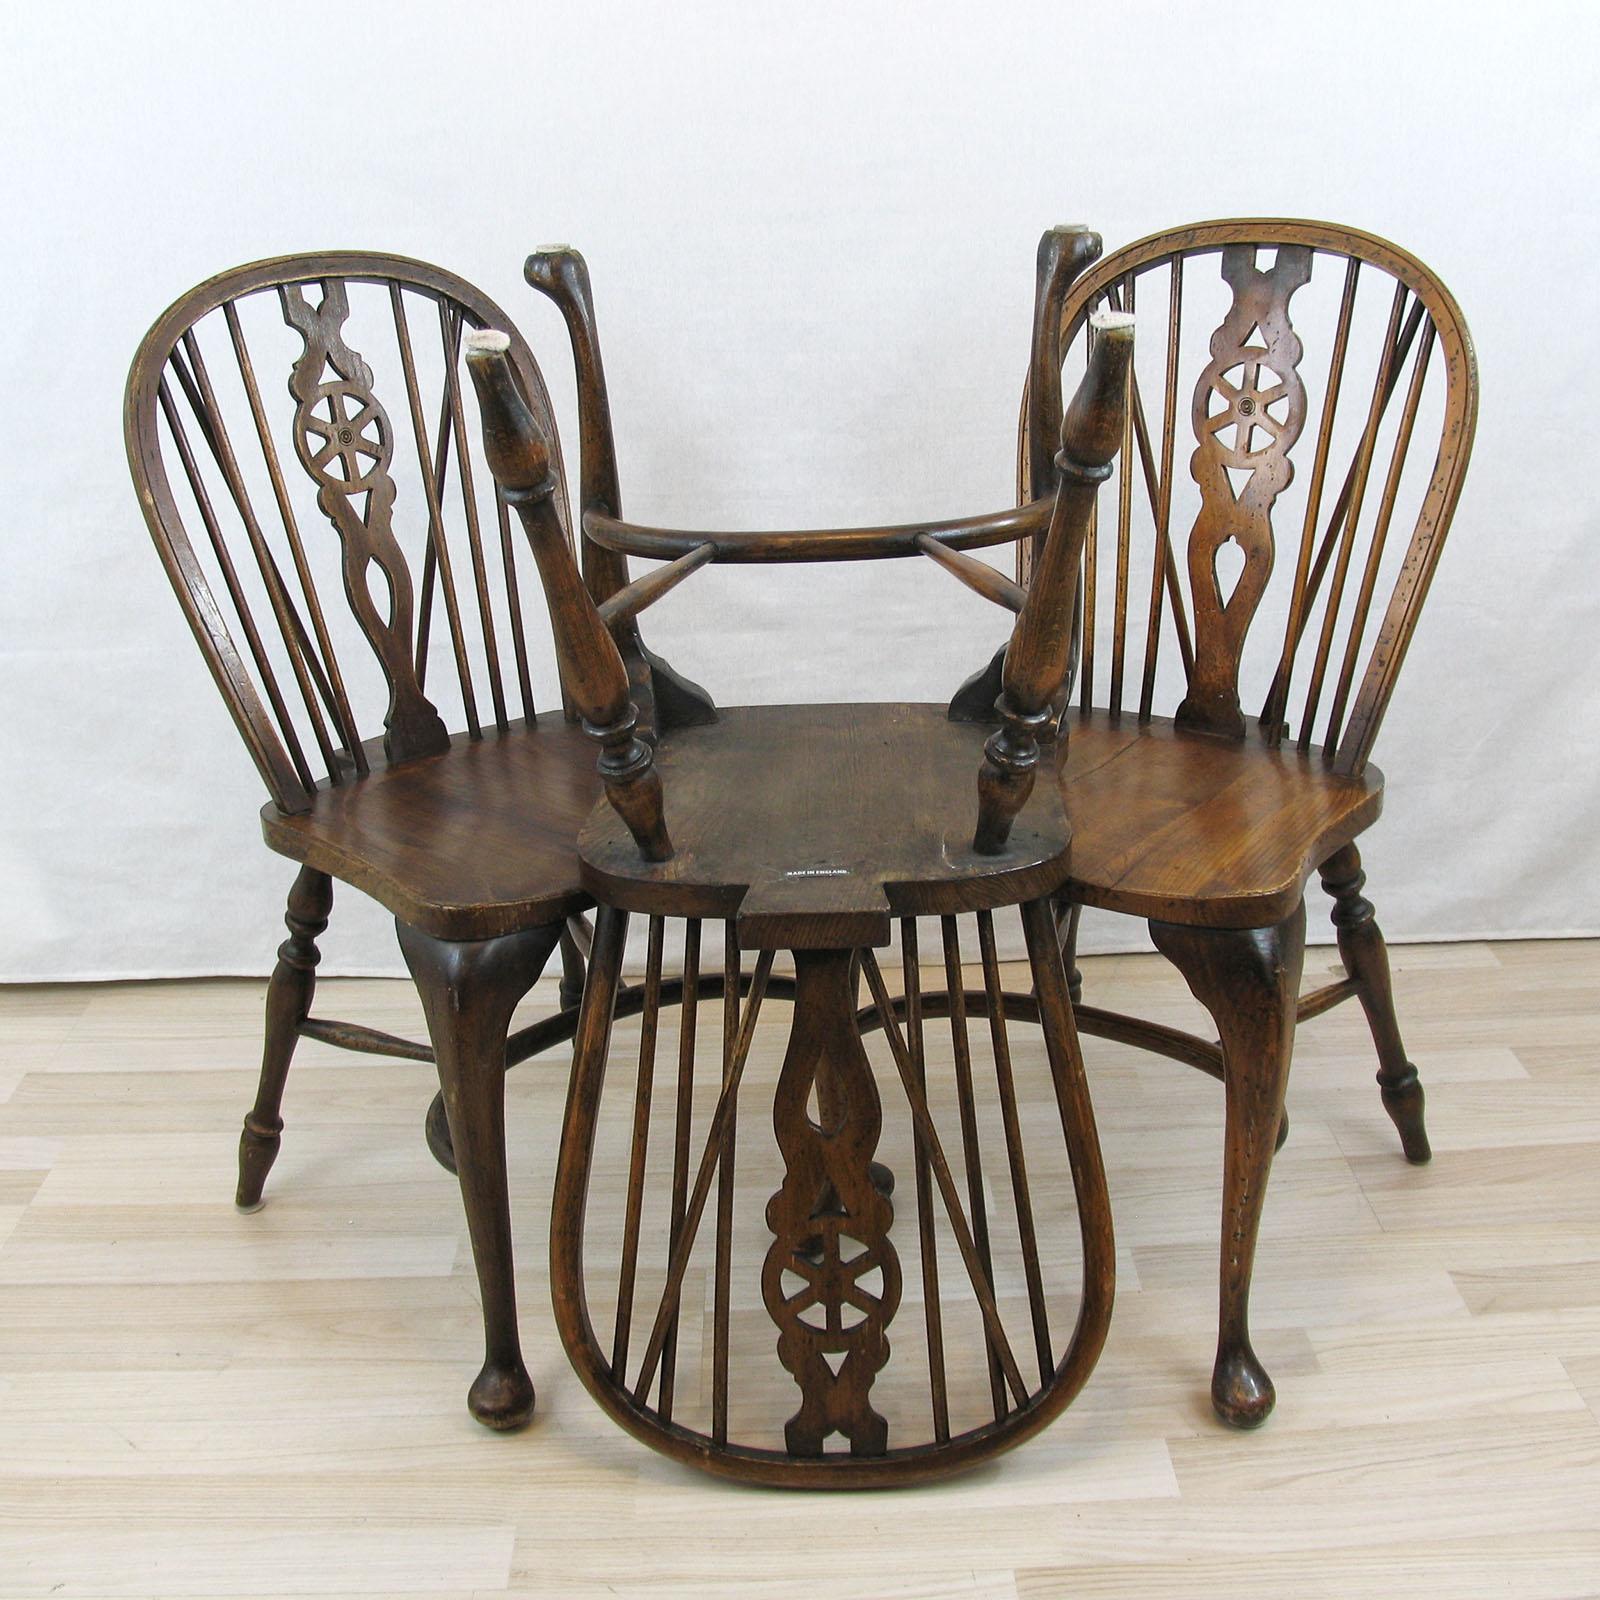 Wood Set of Three Ash and Beech Wheelback Windsor Chairs with Cabriole Leg, England